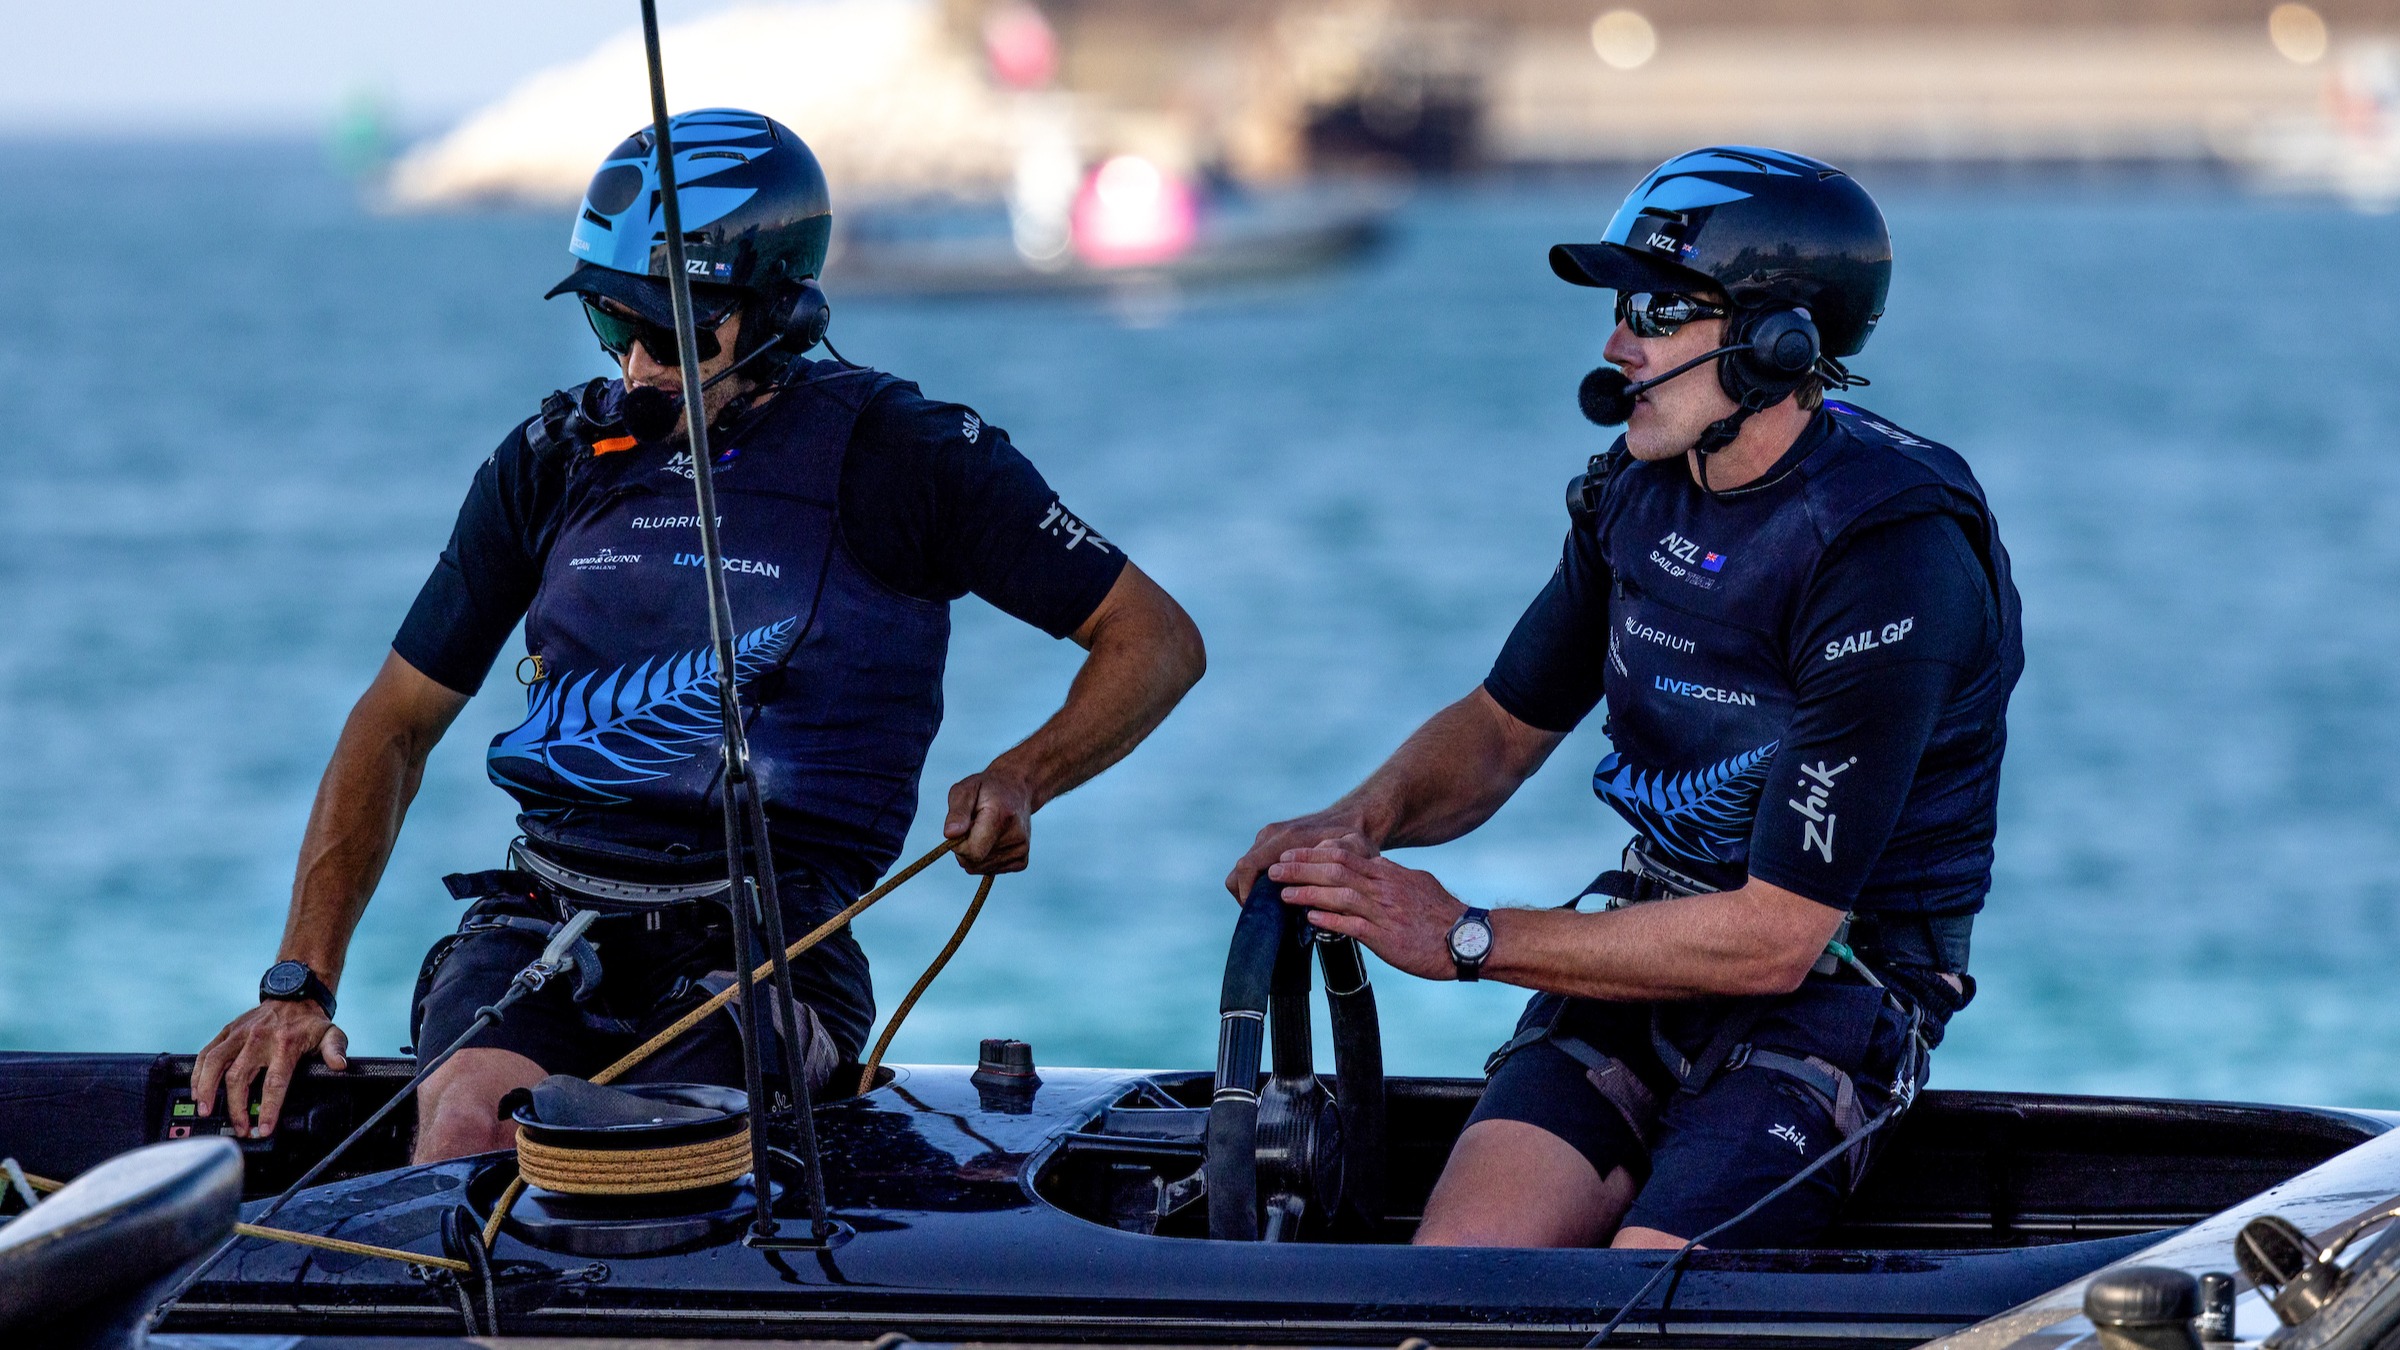 Season 4 // Close up of New Zealand crew on first day of racing in Abu Dhabi 